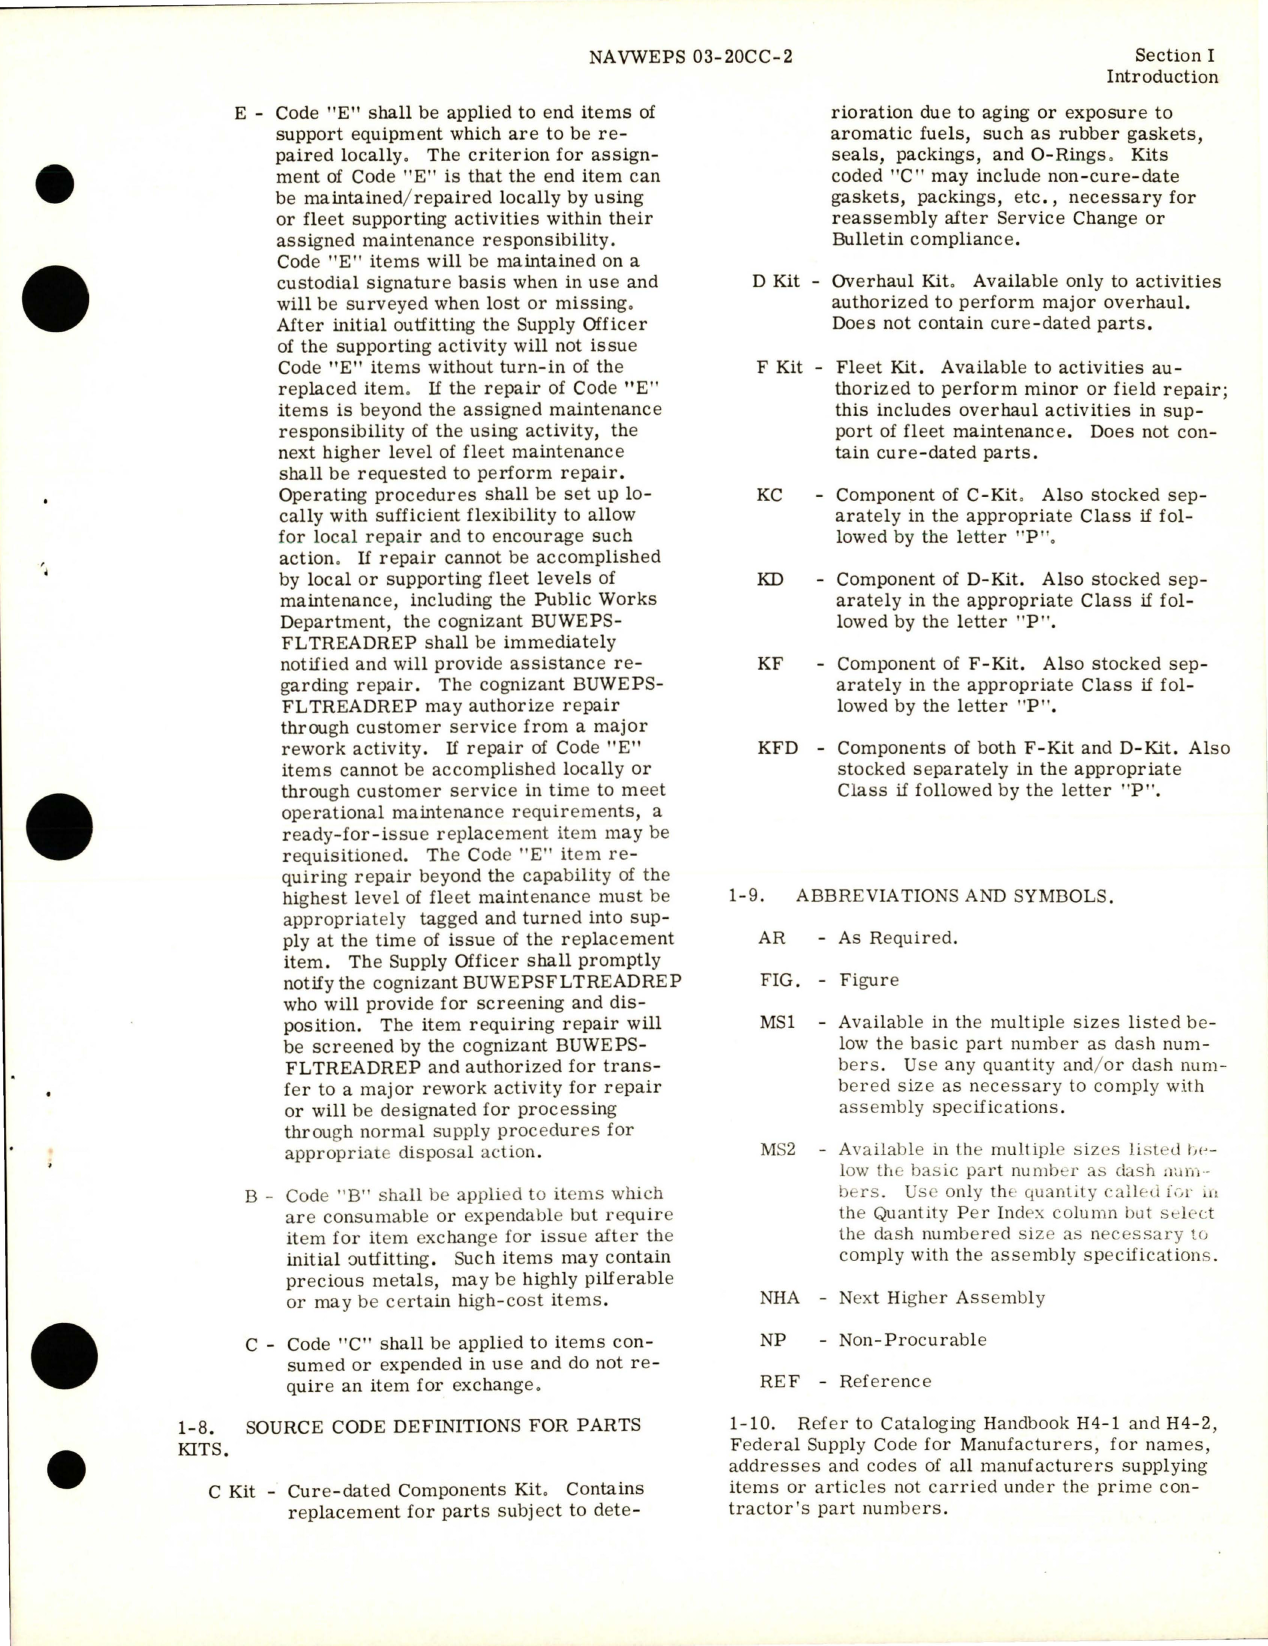 Sample page 7 from AirCorps Library document: Illustrated Parts for Variable Pitch Aircraft Propeller and Blade Assembly